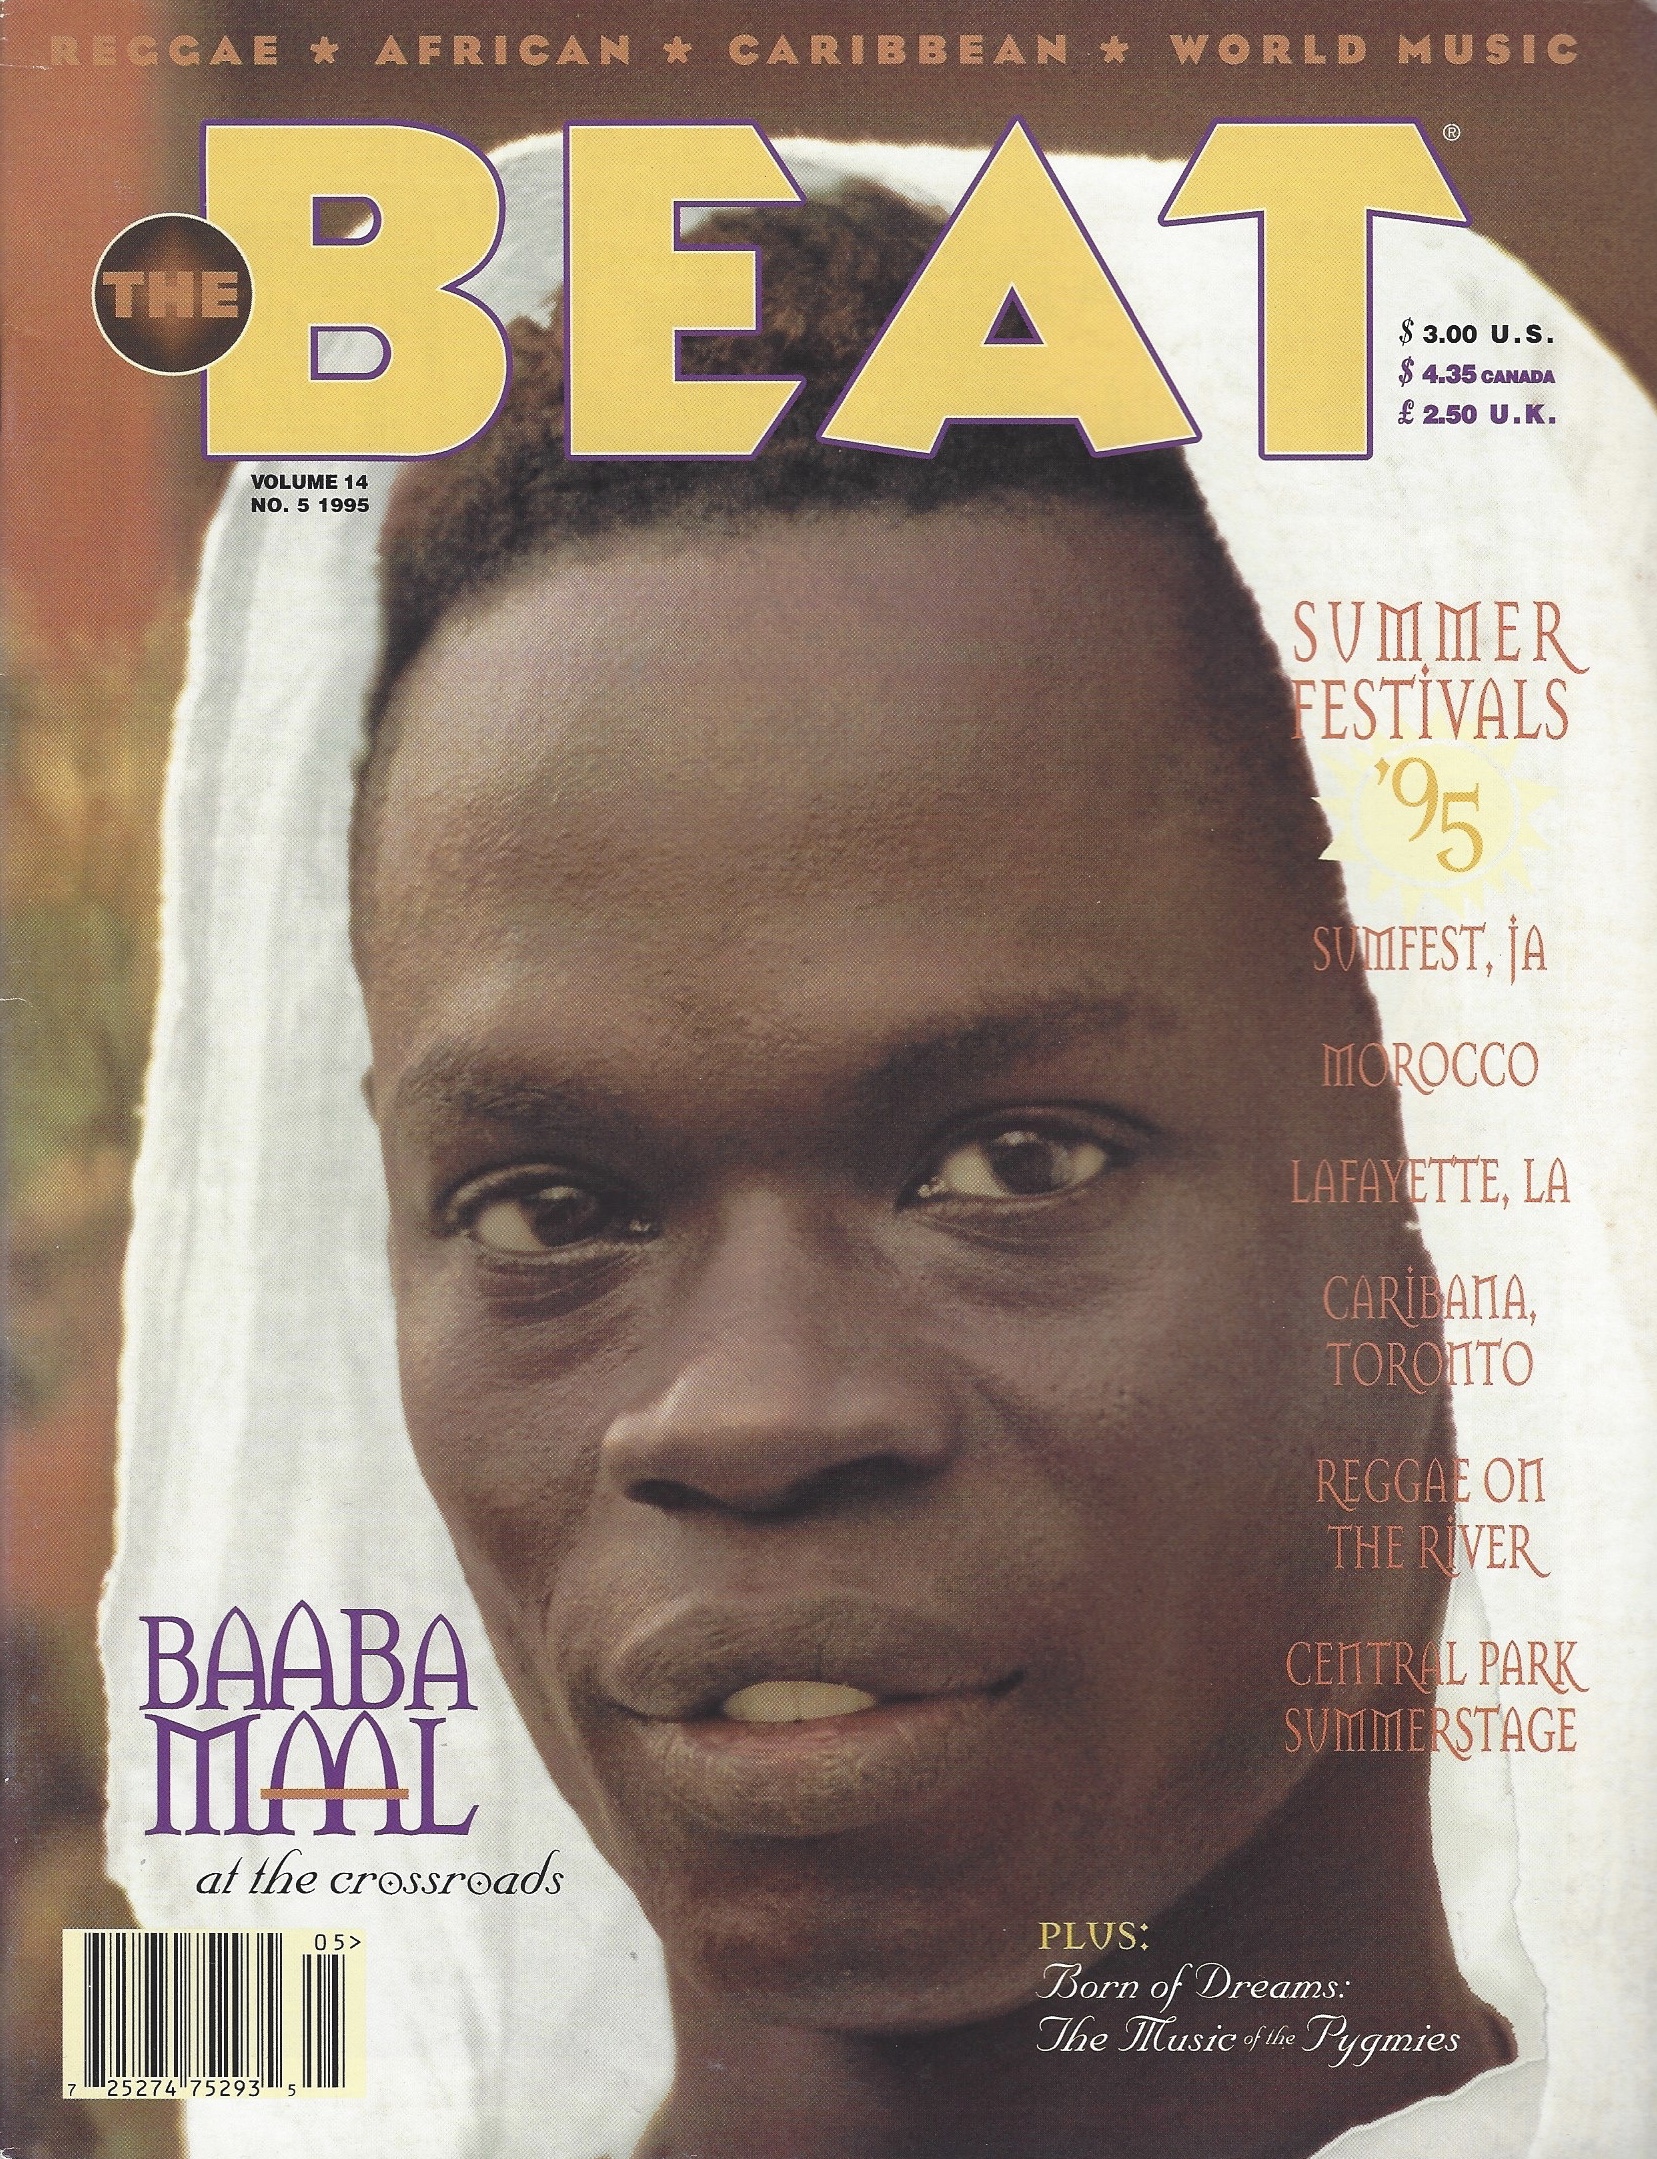 Best of The Beat on Afropop: Baaba Maal